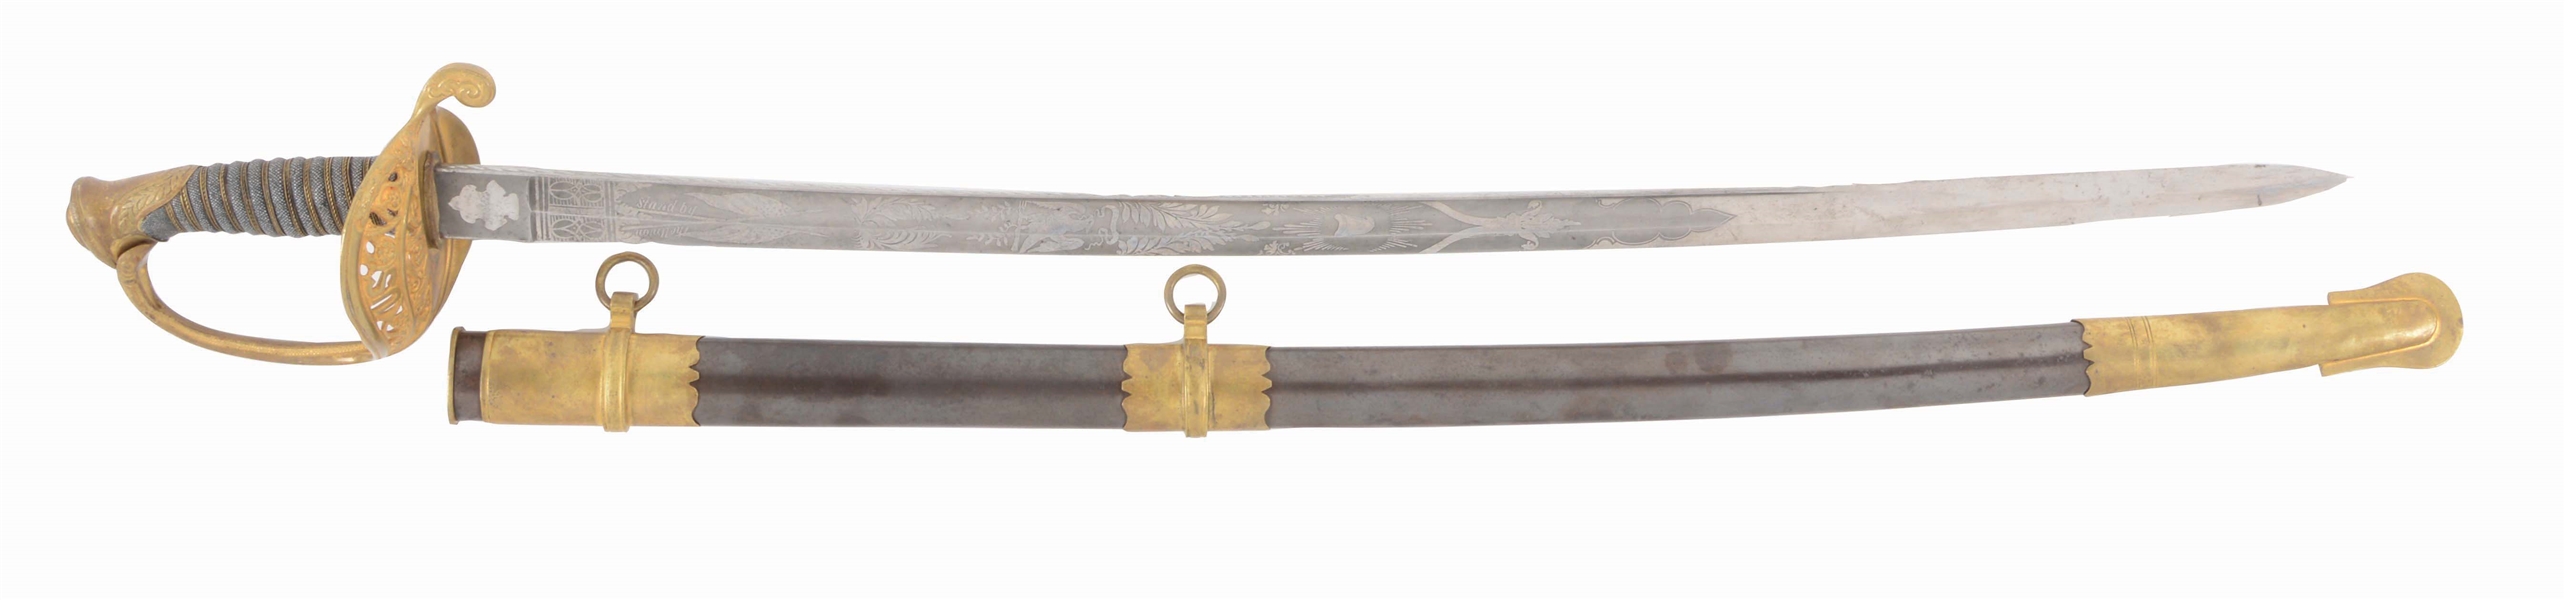 U.S. 1850 STAFF AND FIELD OFFICERS SWORD WITH SCABBARD.